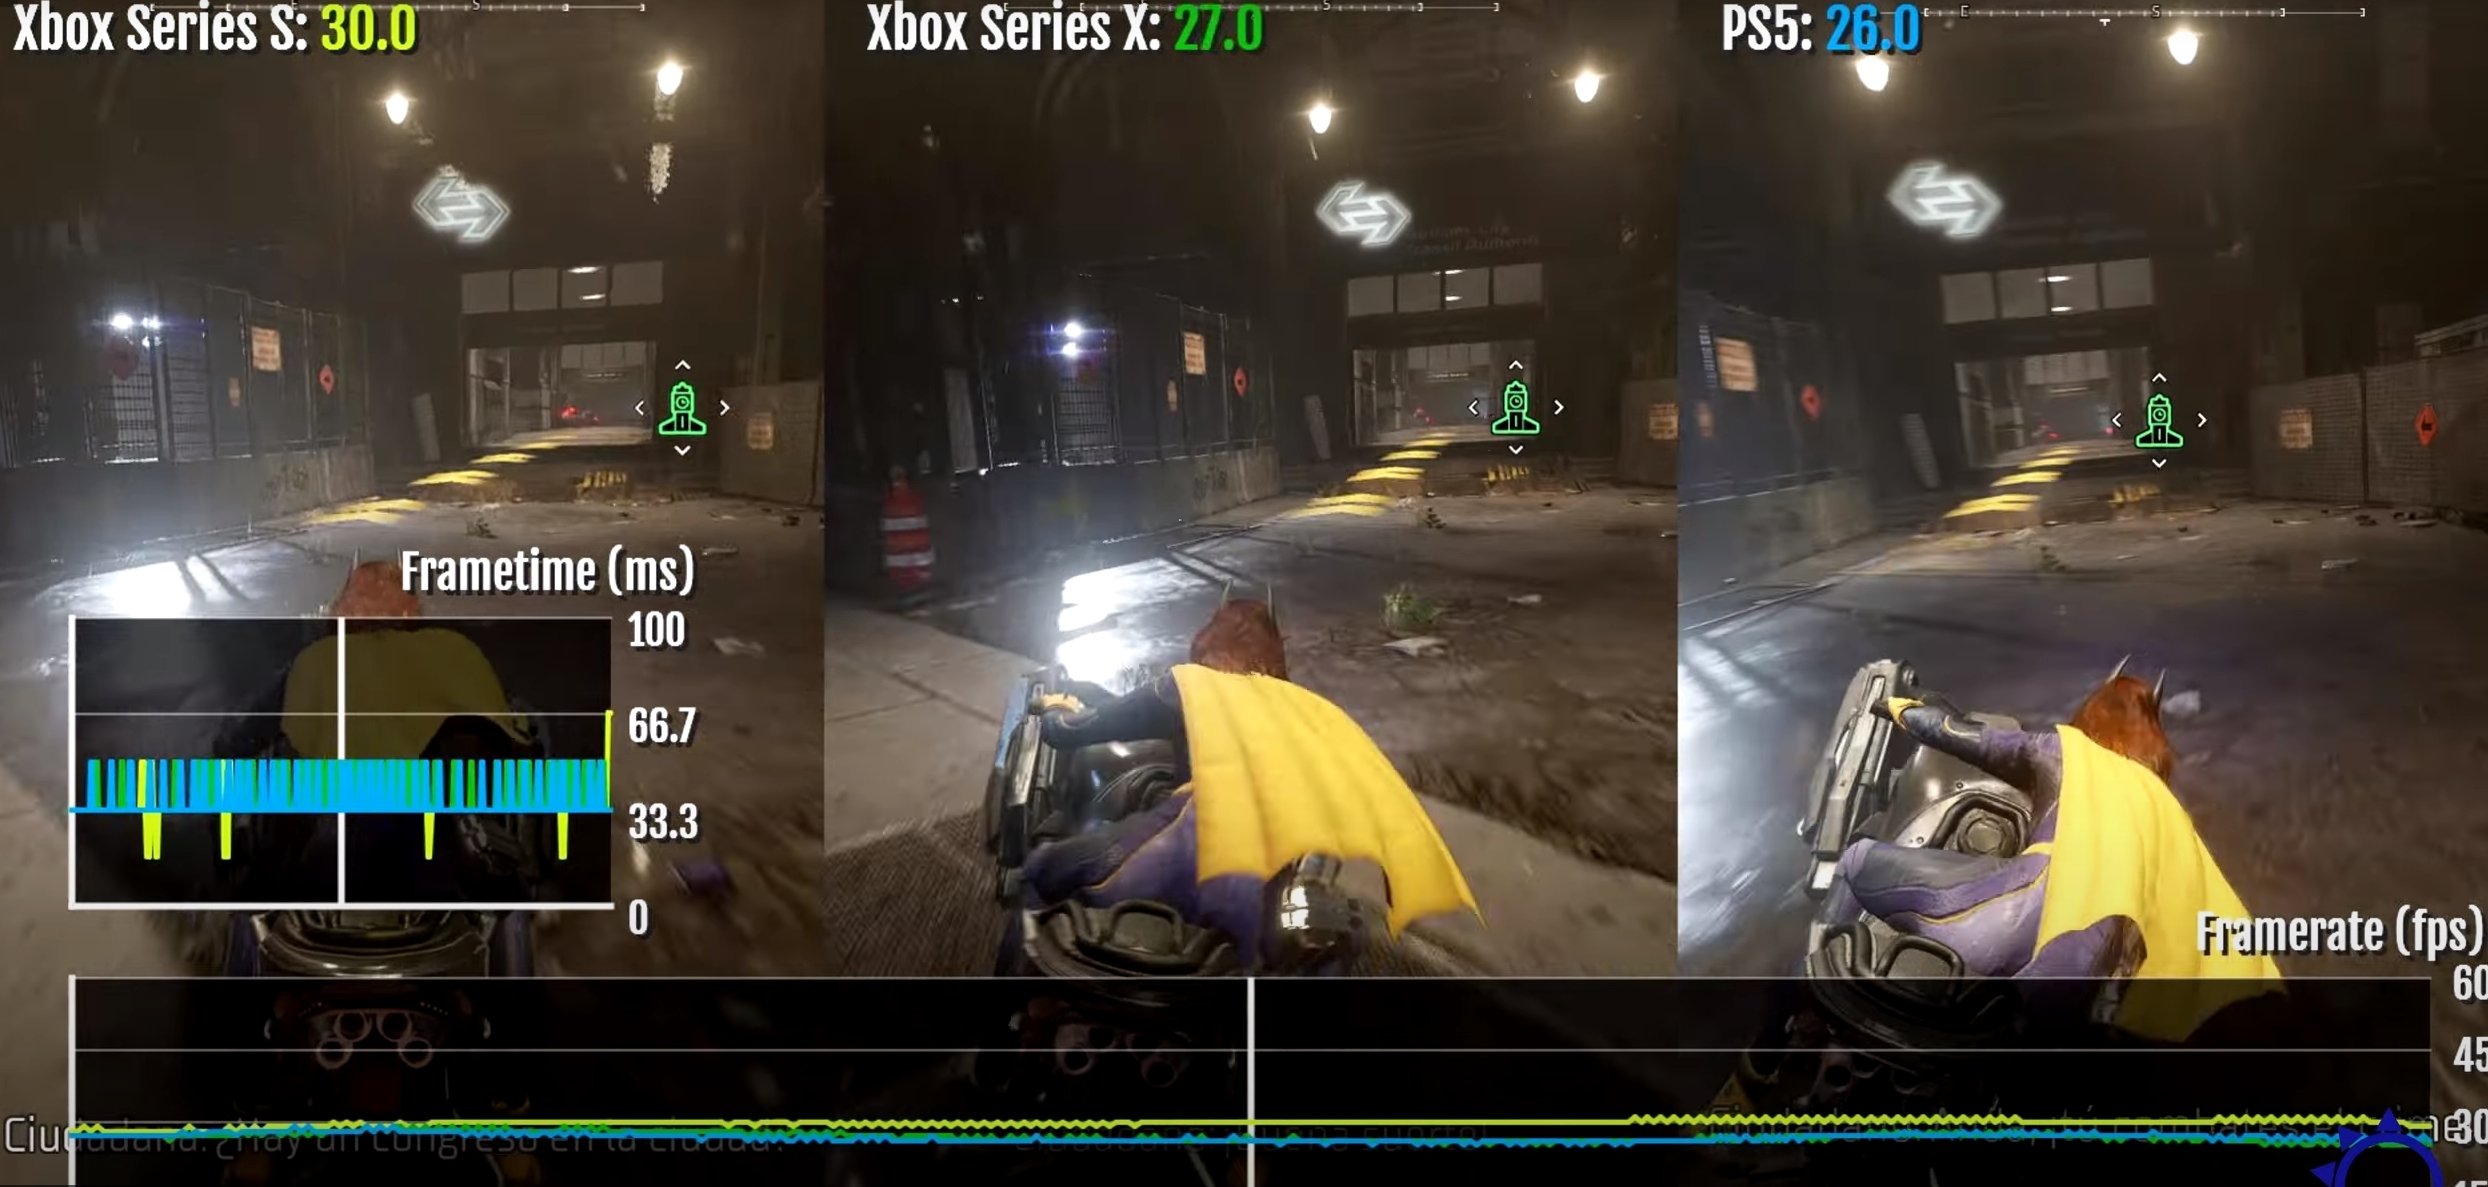 They Fixed Gotham Knights! DF Tech Re-Review - PS5, Xbox Series X/S, PC  Re-Tested! : r/XboxSeriesX